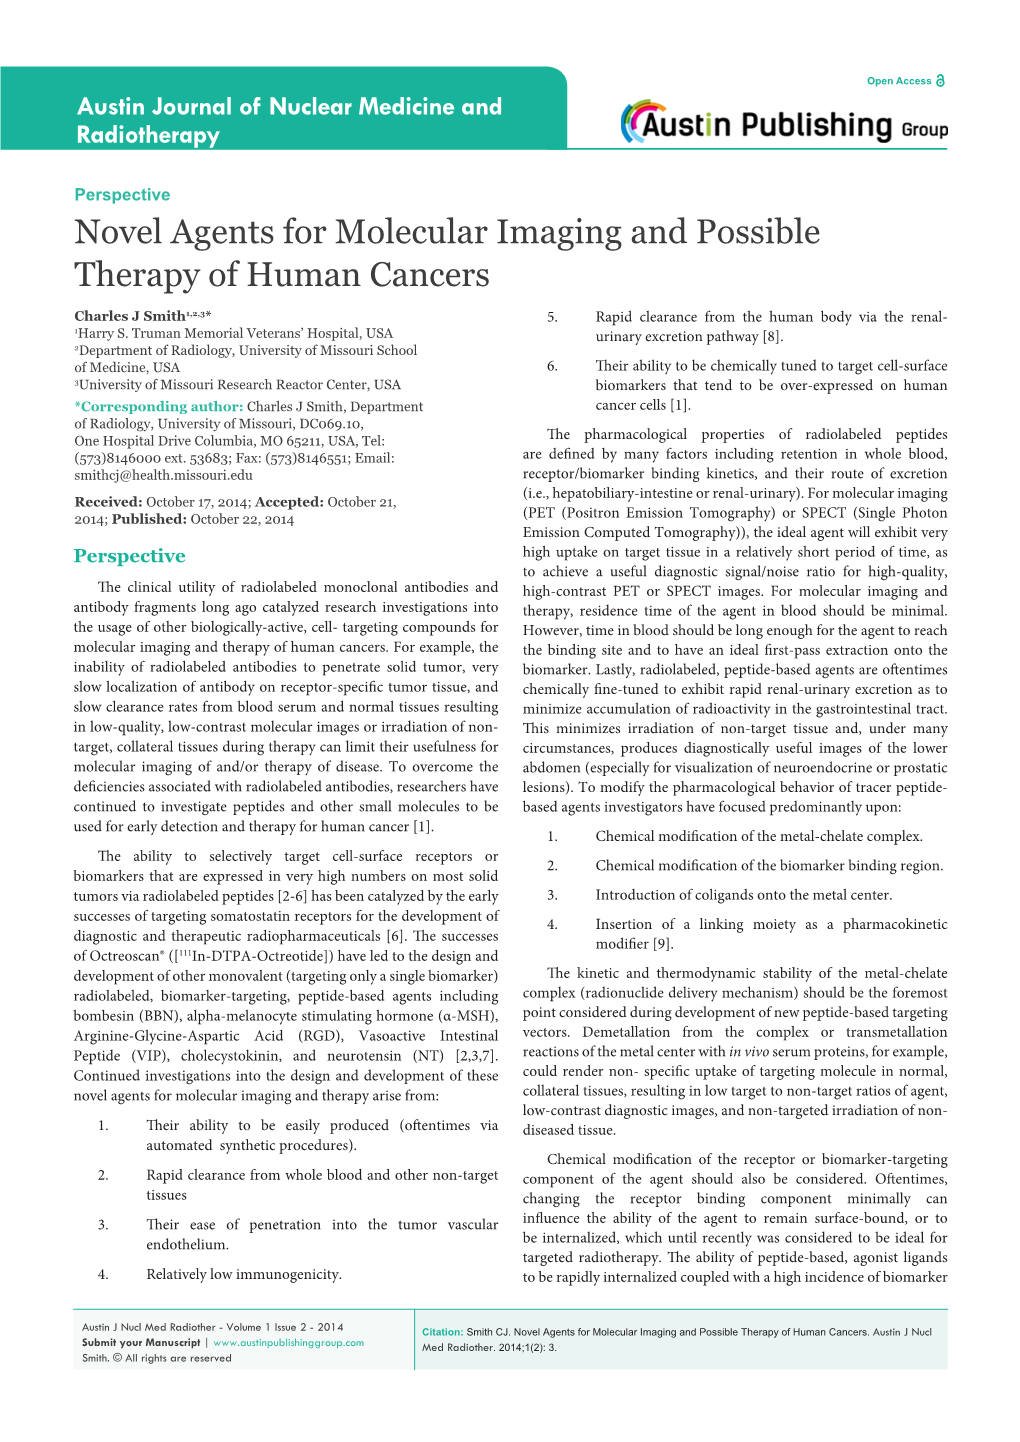 Novel Agents for Molecular Imaging and Possible Therapy of Human Cancers Charles J Smith1,2,3* 5